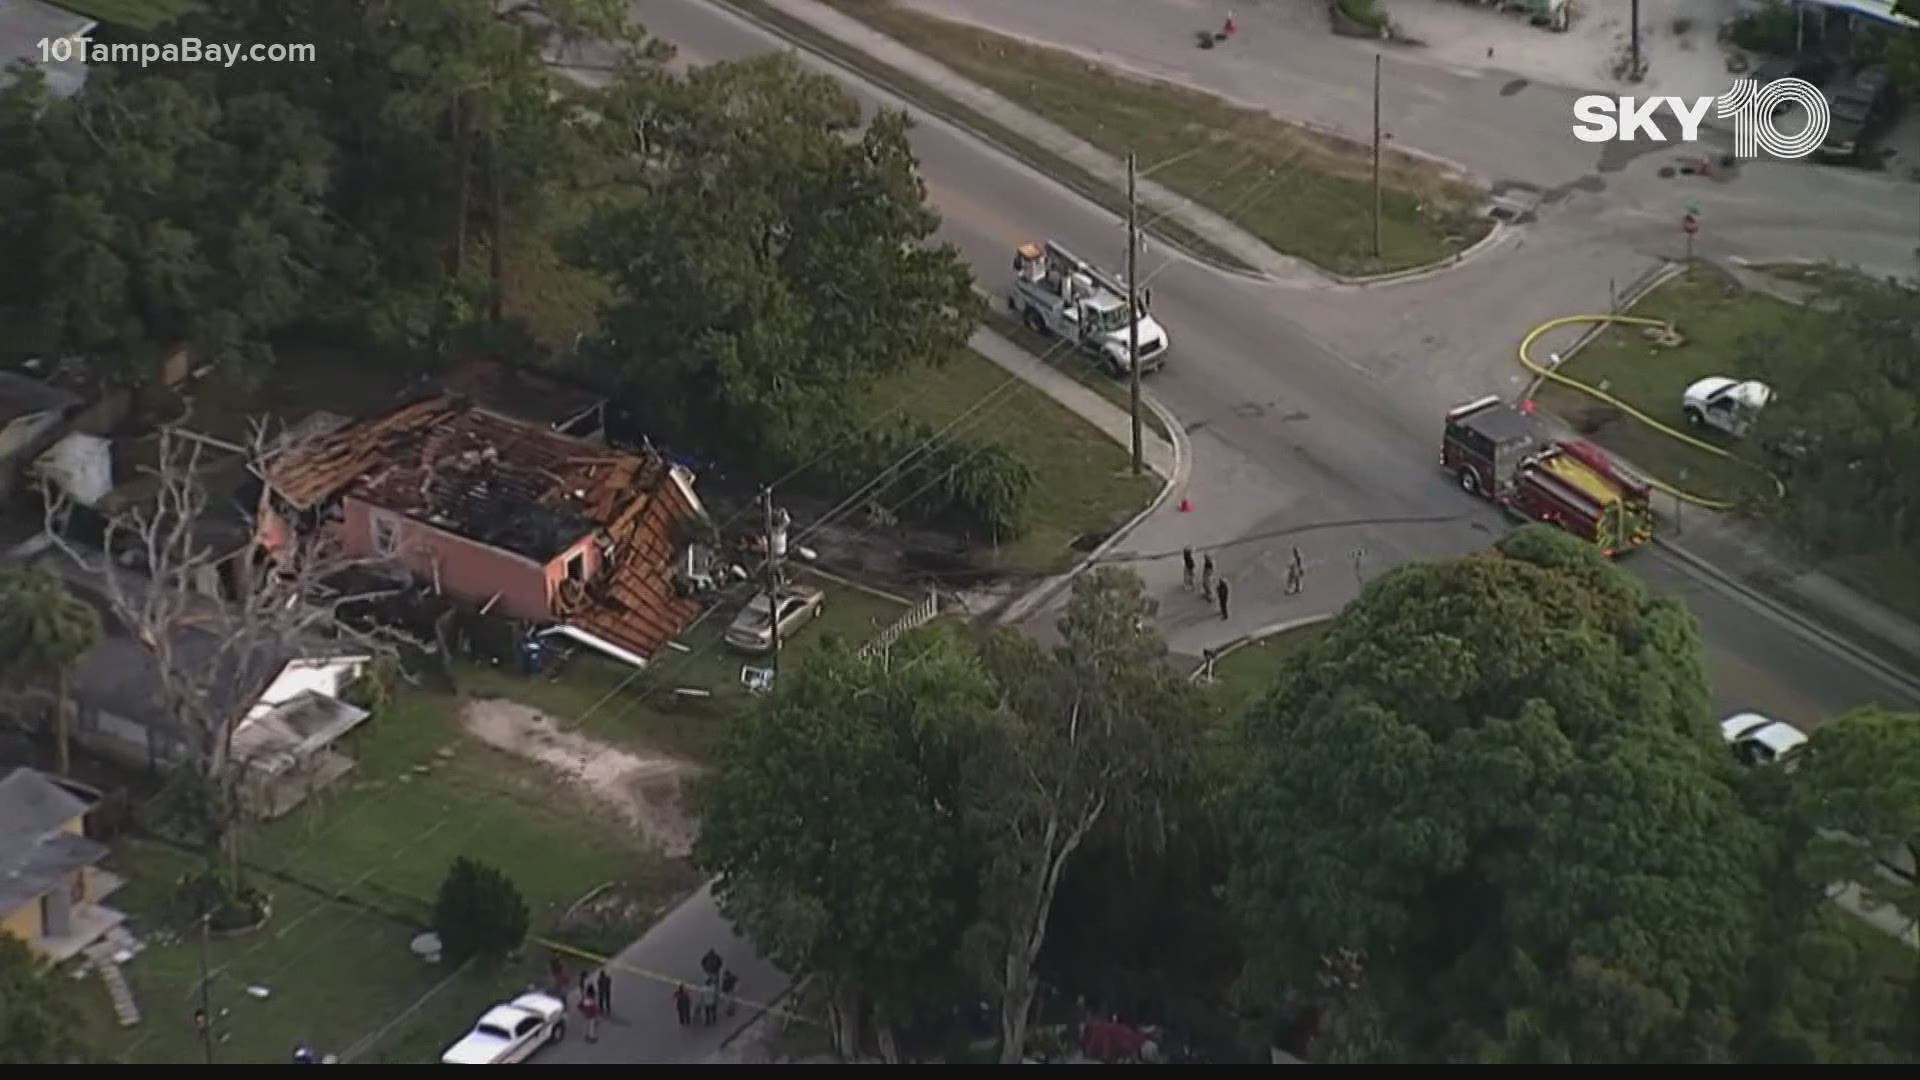 The family's house exploded after a gas leak was reported in the neighborhood.